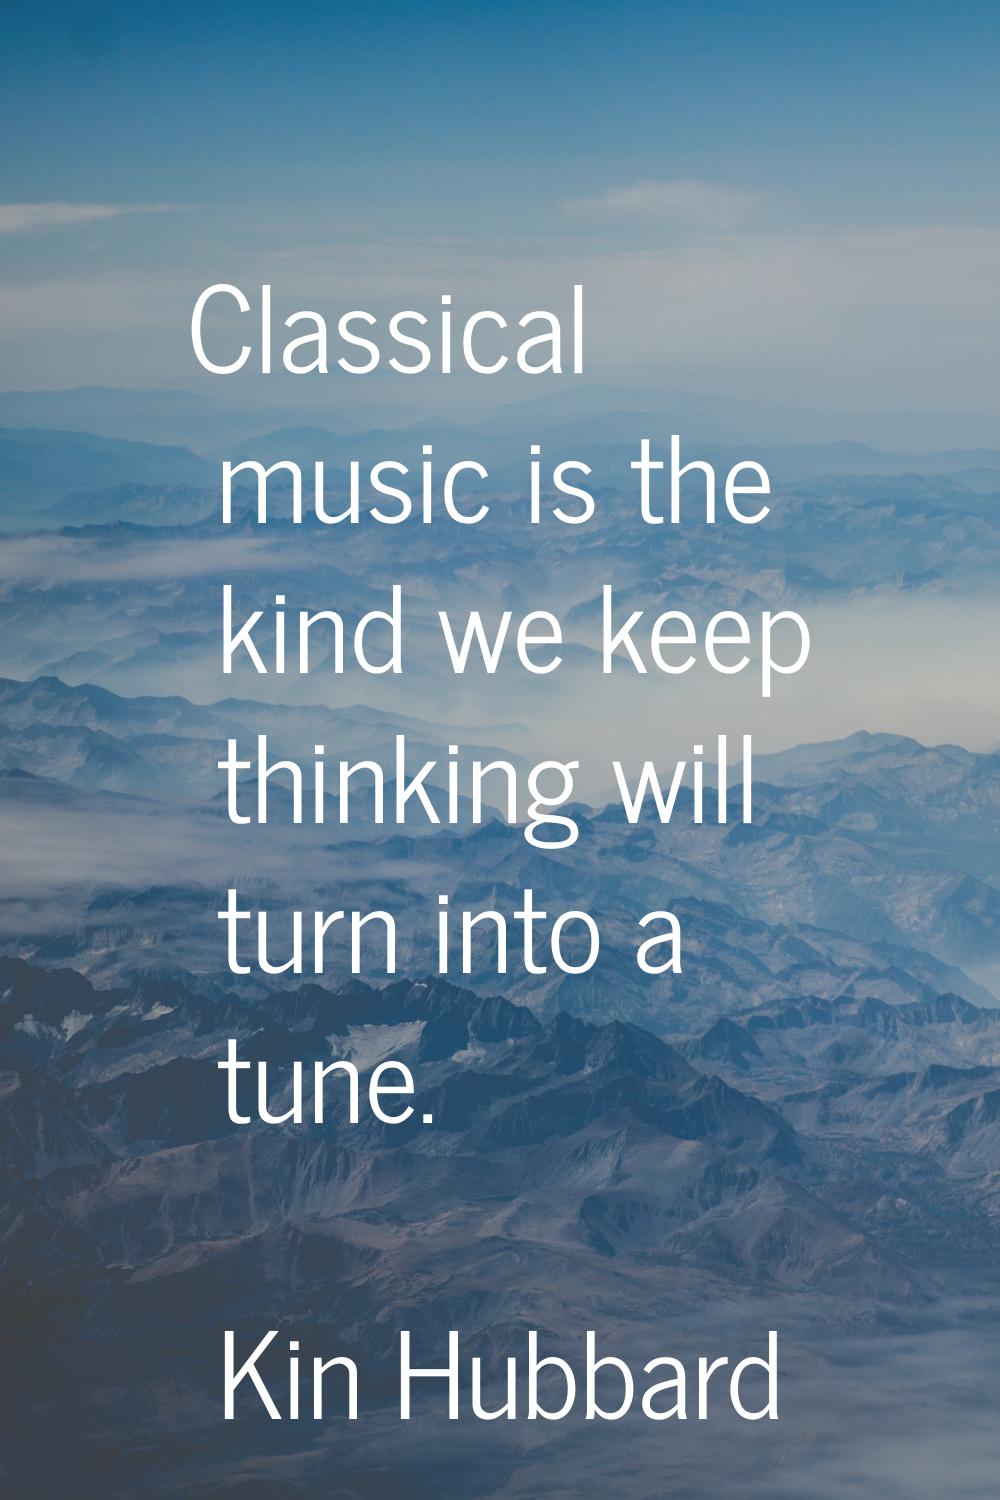 Classical music is the kind we keep thinking will turn into a tune.